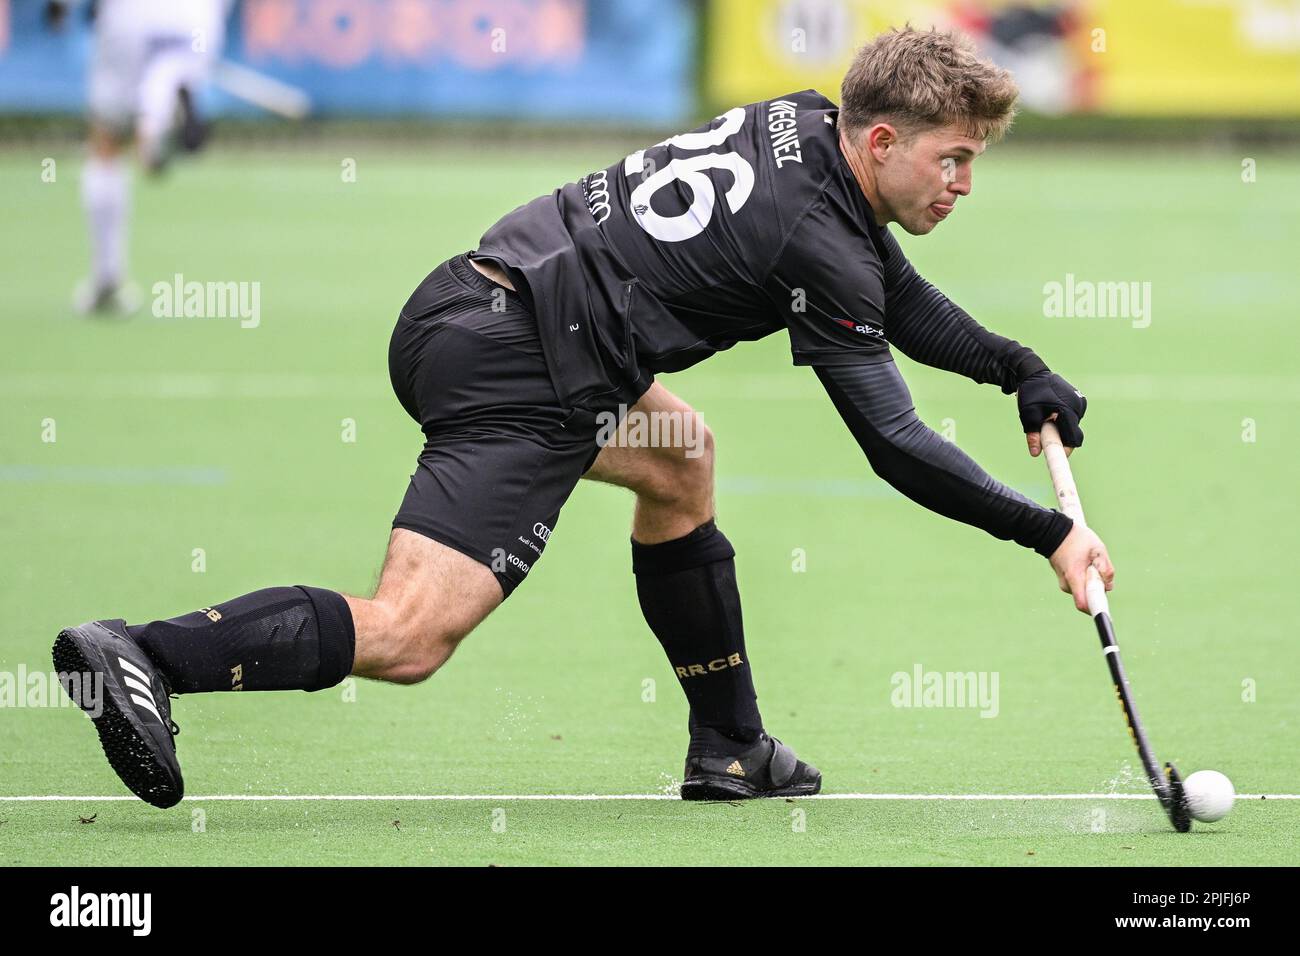 Brussels, Belgium. 02nd Apr, 2023. Racing's Victor Wegnez pictured in action during a hockey game between Royal Racing Club Bruxelles and KHC Dragons, Sunday 02 April 2023 in Uccle/Ukkel, Brussels, on day 17 of the Belgian Men Hockey League season 2022-2023. BELGA PHOTO LAURIE DIEFFEMBACQ Credit: Belga News Agency/Alamy Live News Stock Photo